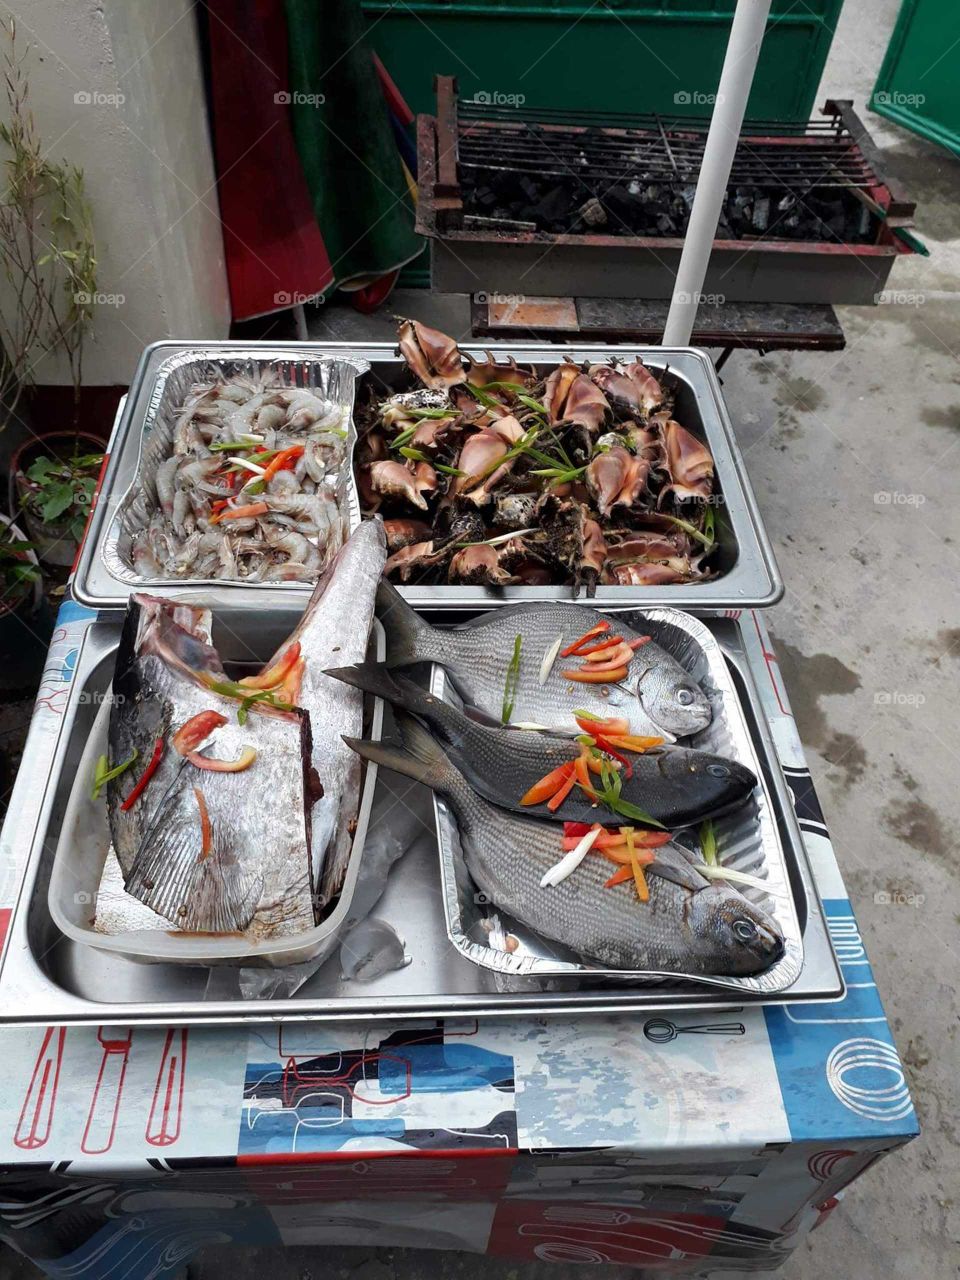 Seafoods!